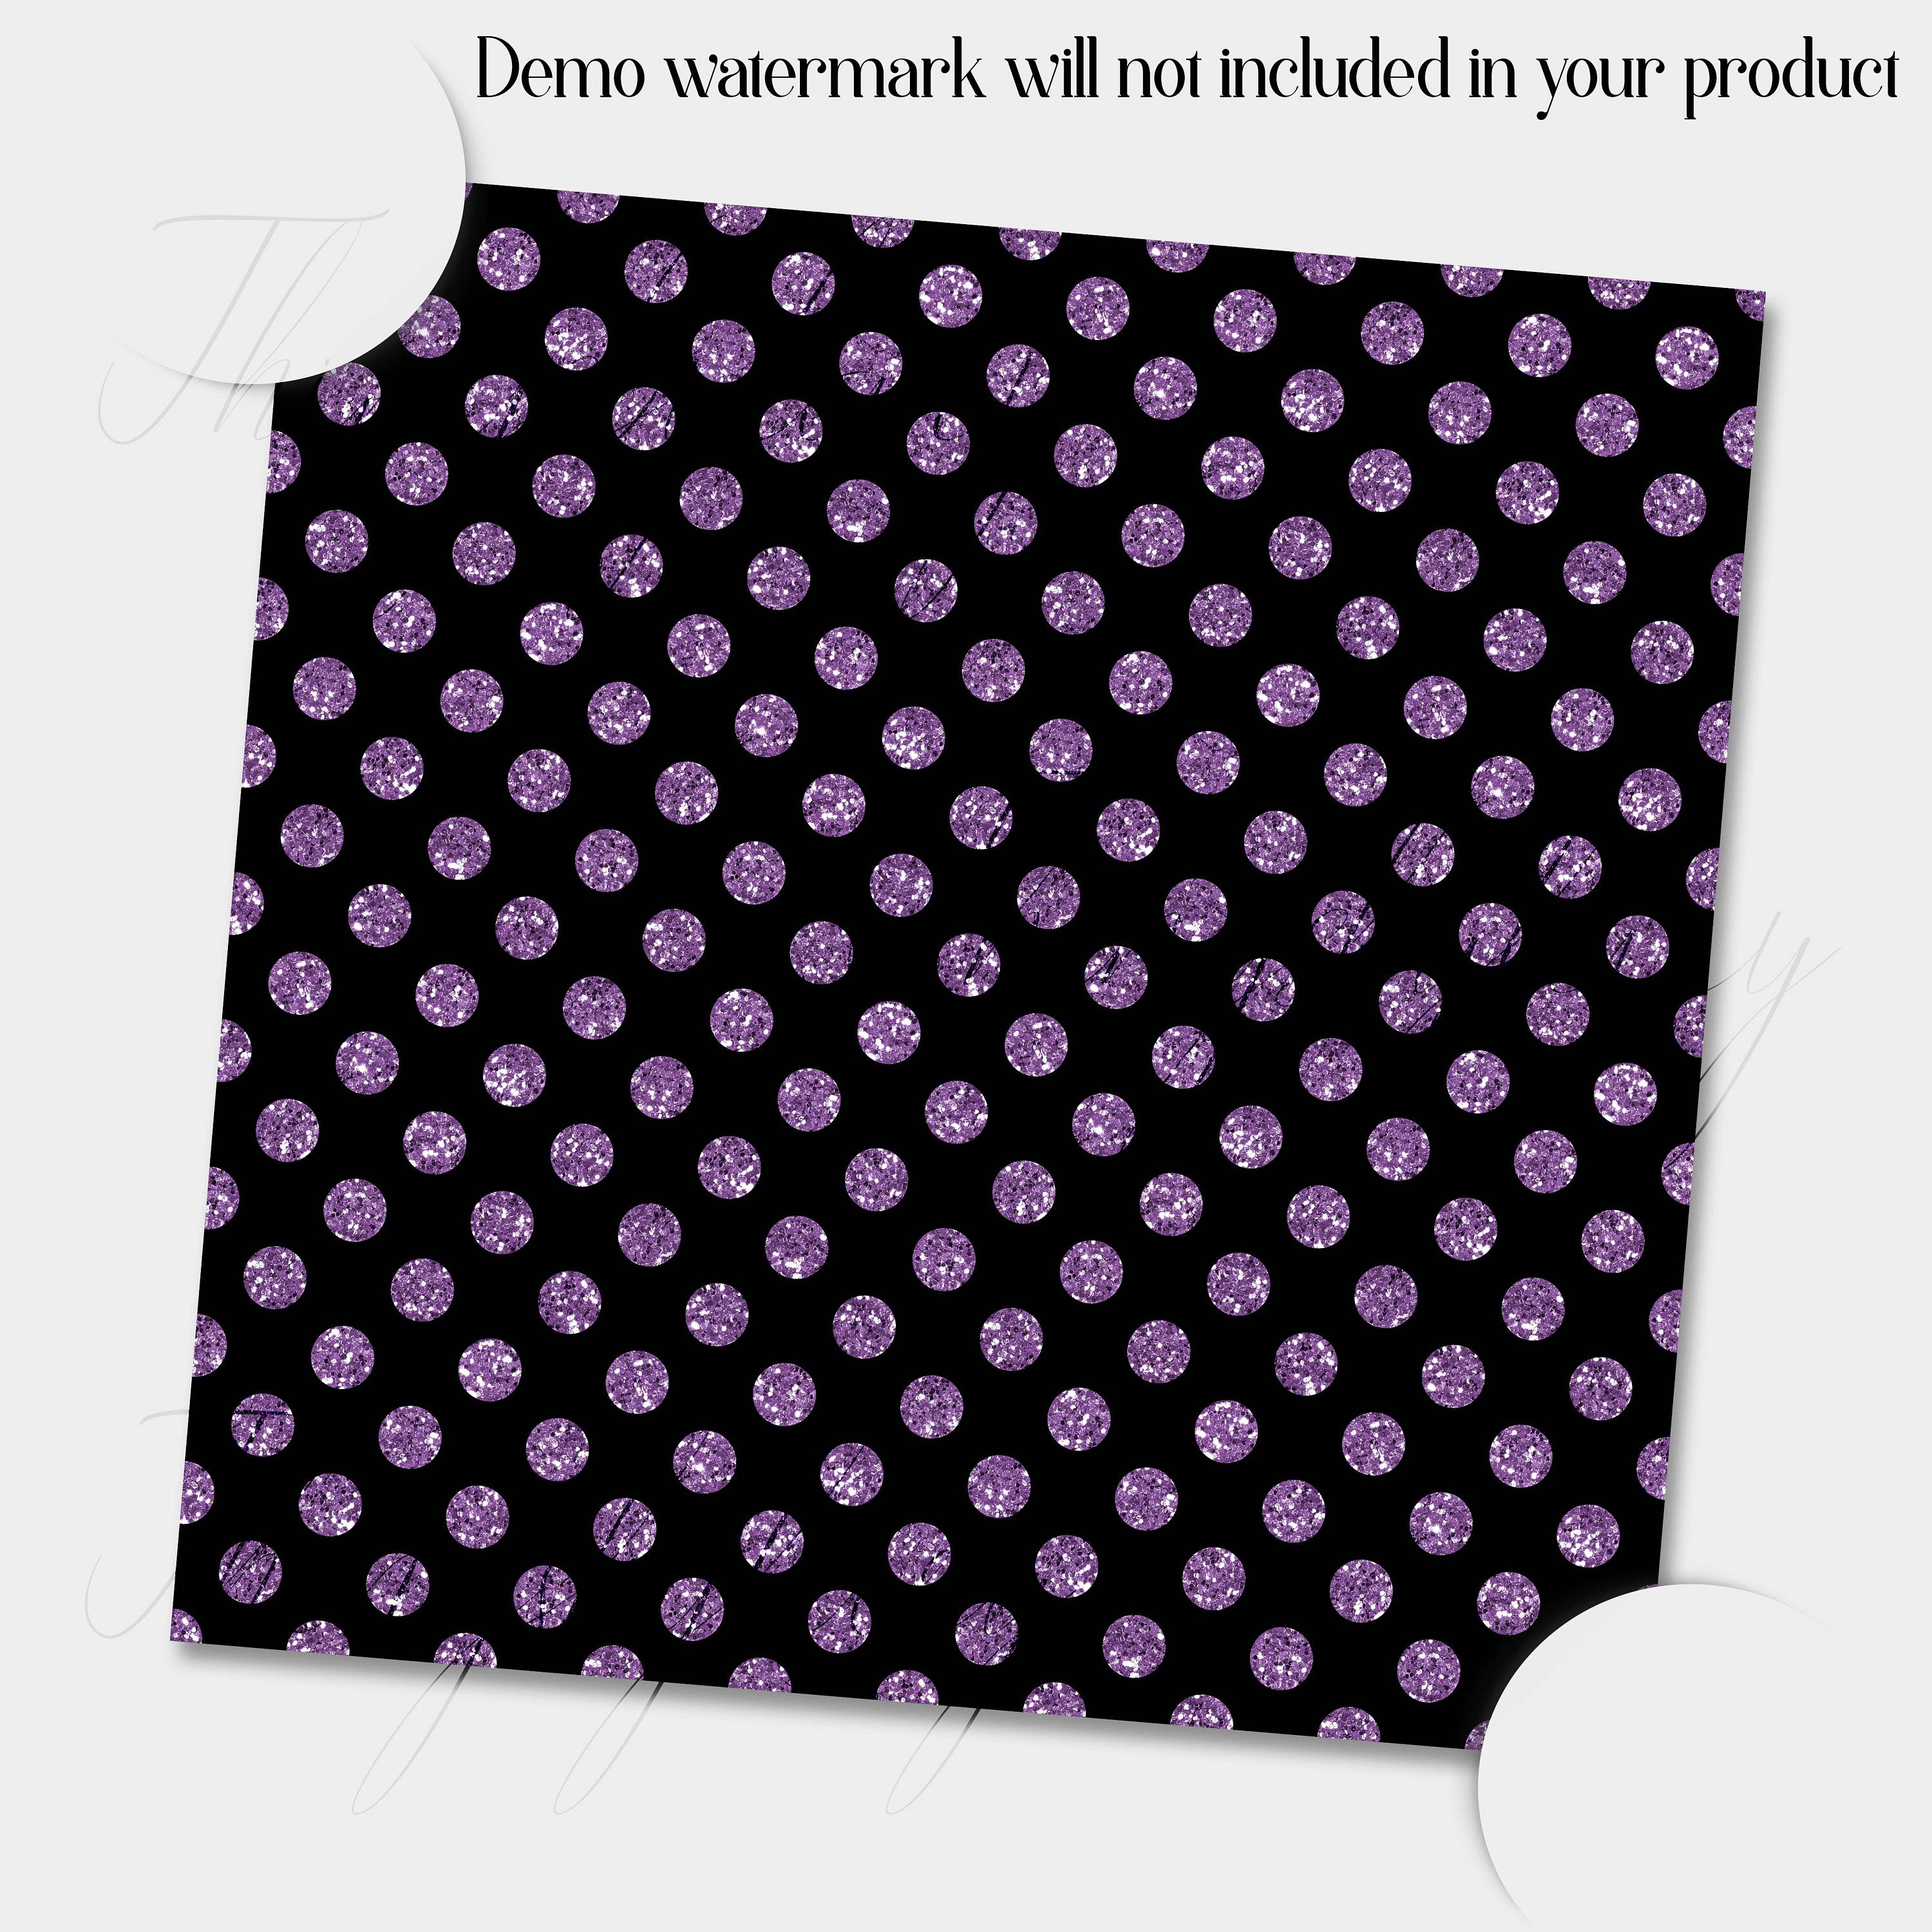 100 Seamless Black & Glitter Polka Dot Digital Papers 12x12&quot; 300 Dpi Commercial Use Instant Download Printable Note Book Fabric Print Shabby